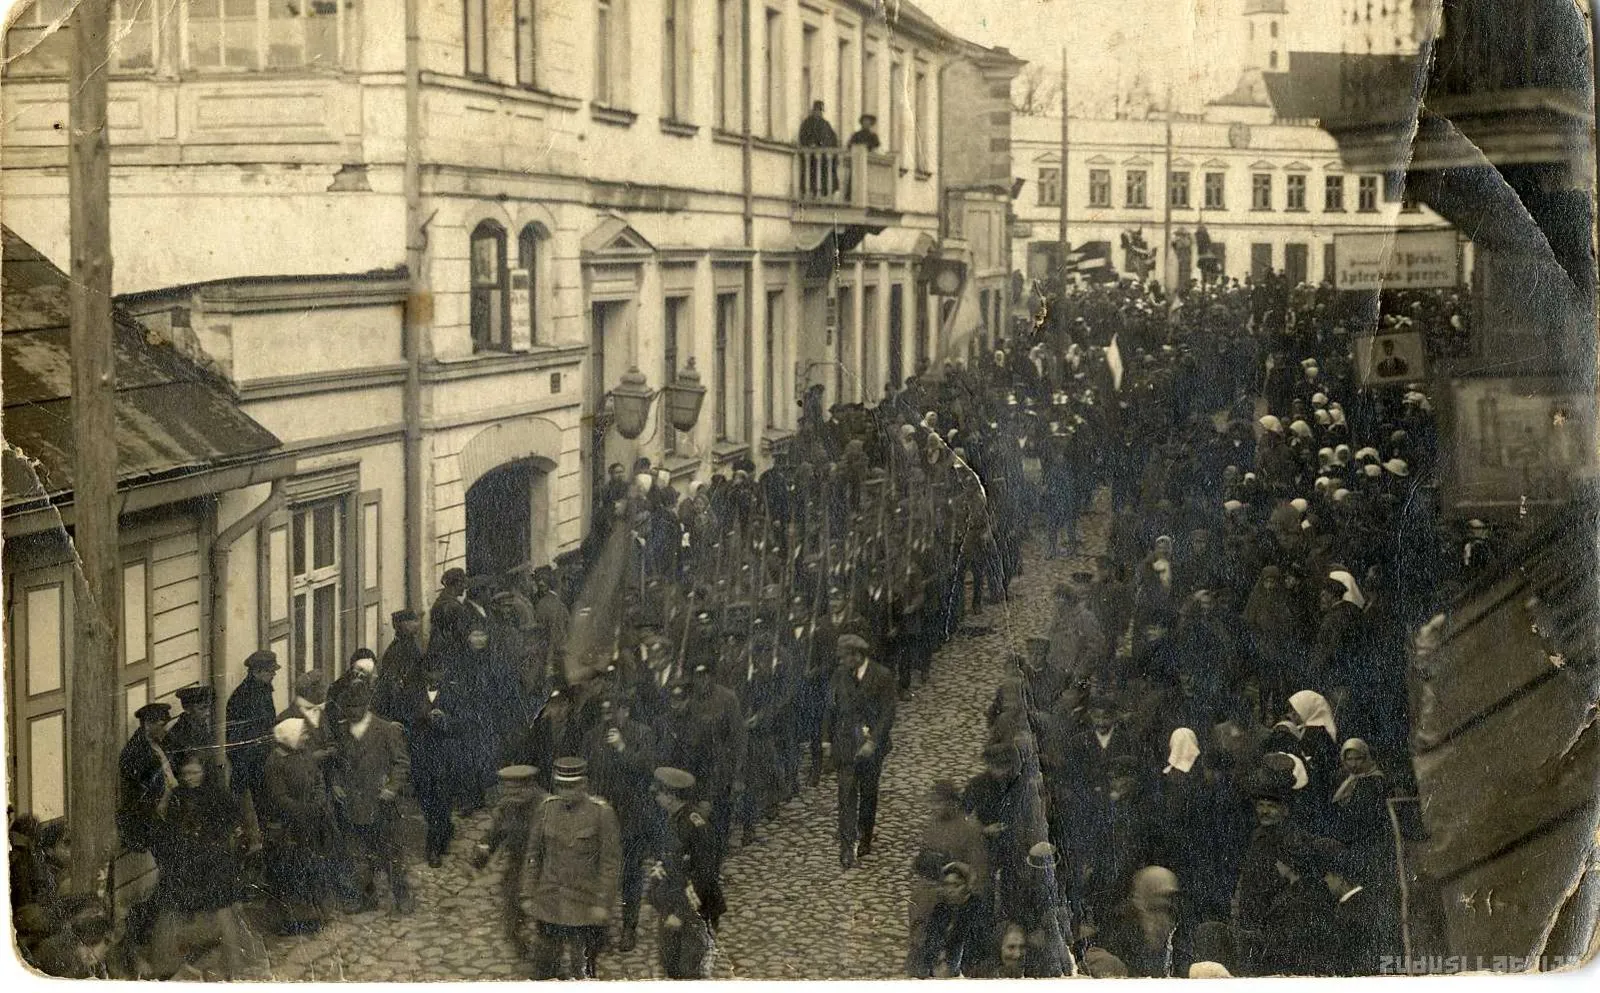 Photo showing: The march of soldiers mobilized by the Latvian Provisional Government along Jūras Street in Limbaži in 1919.